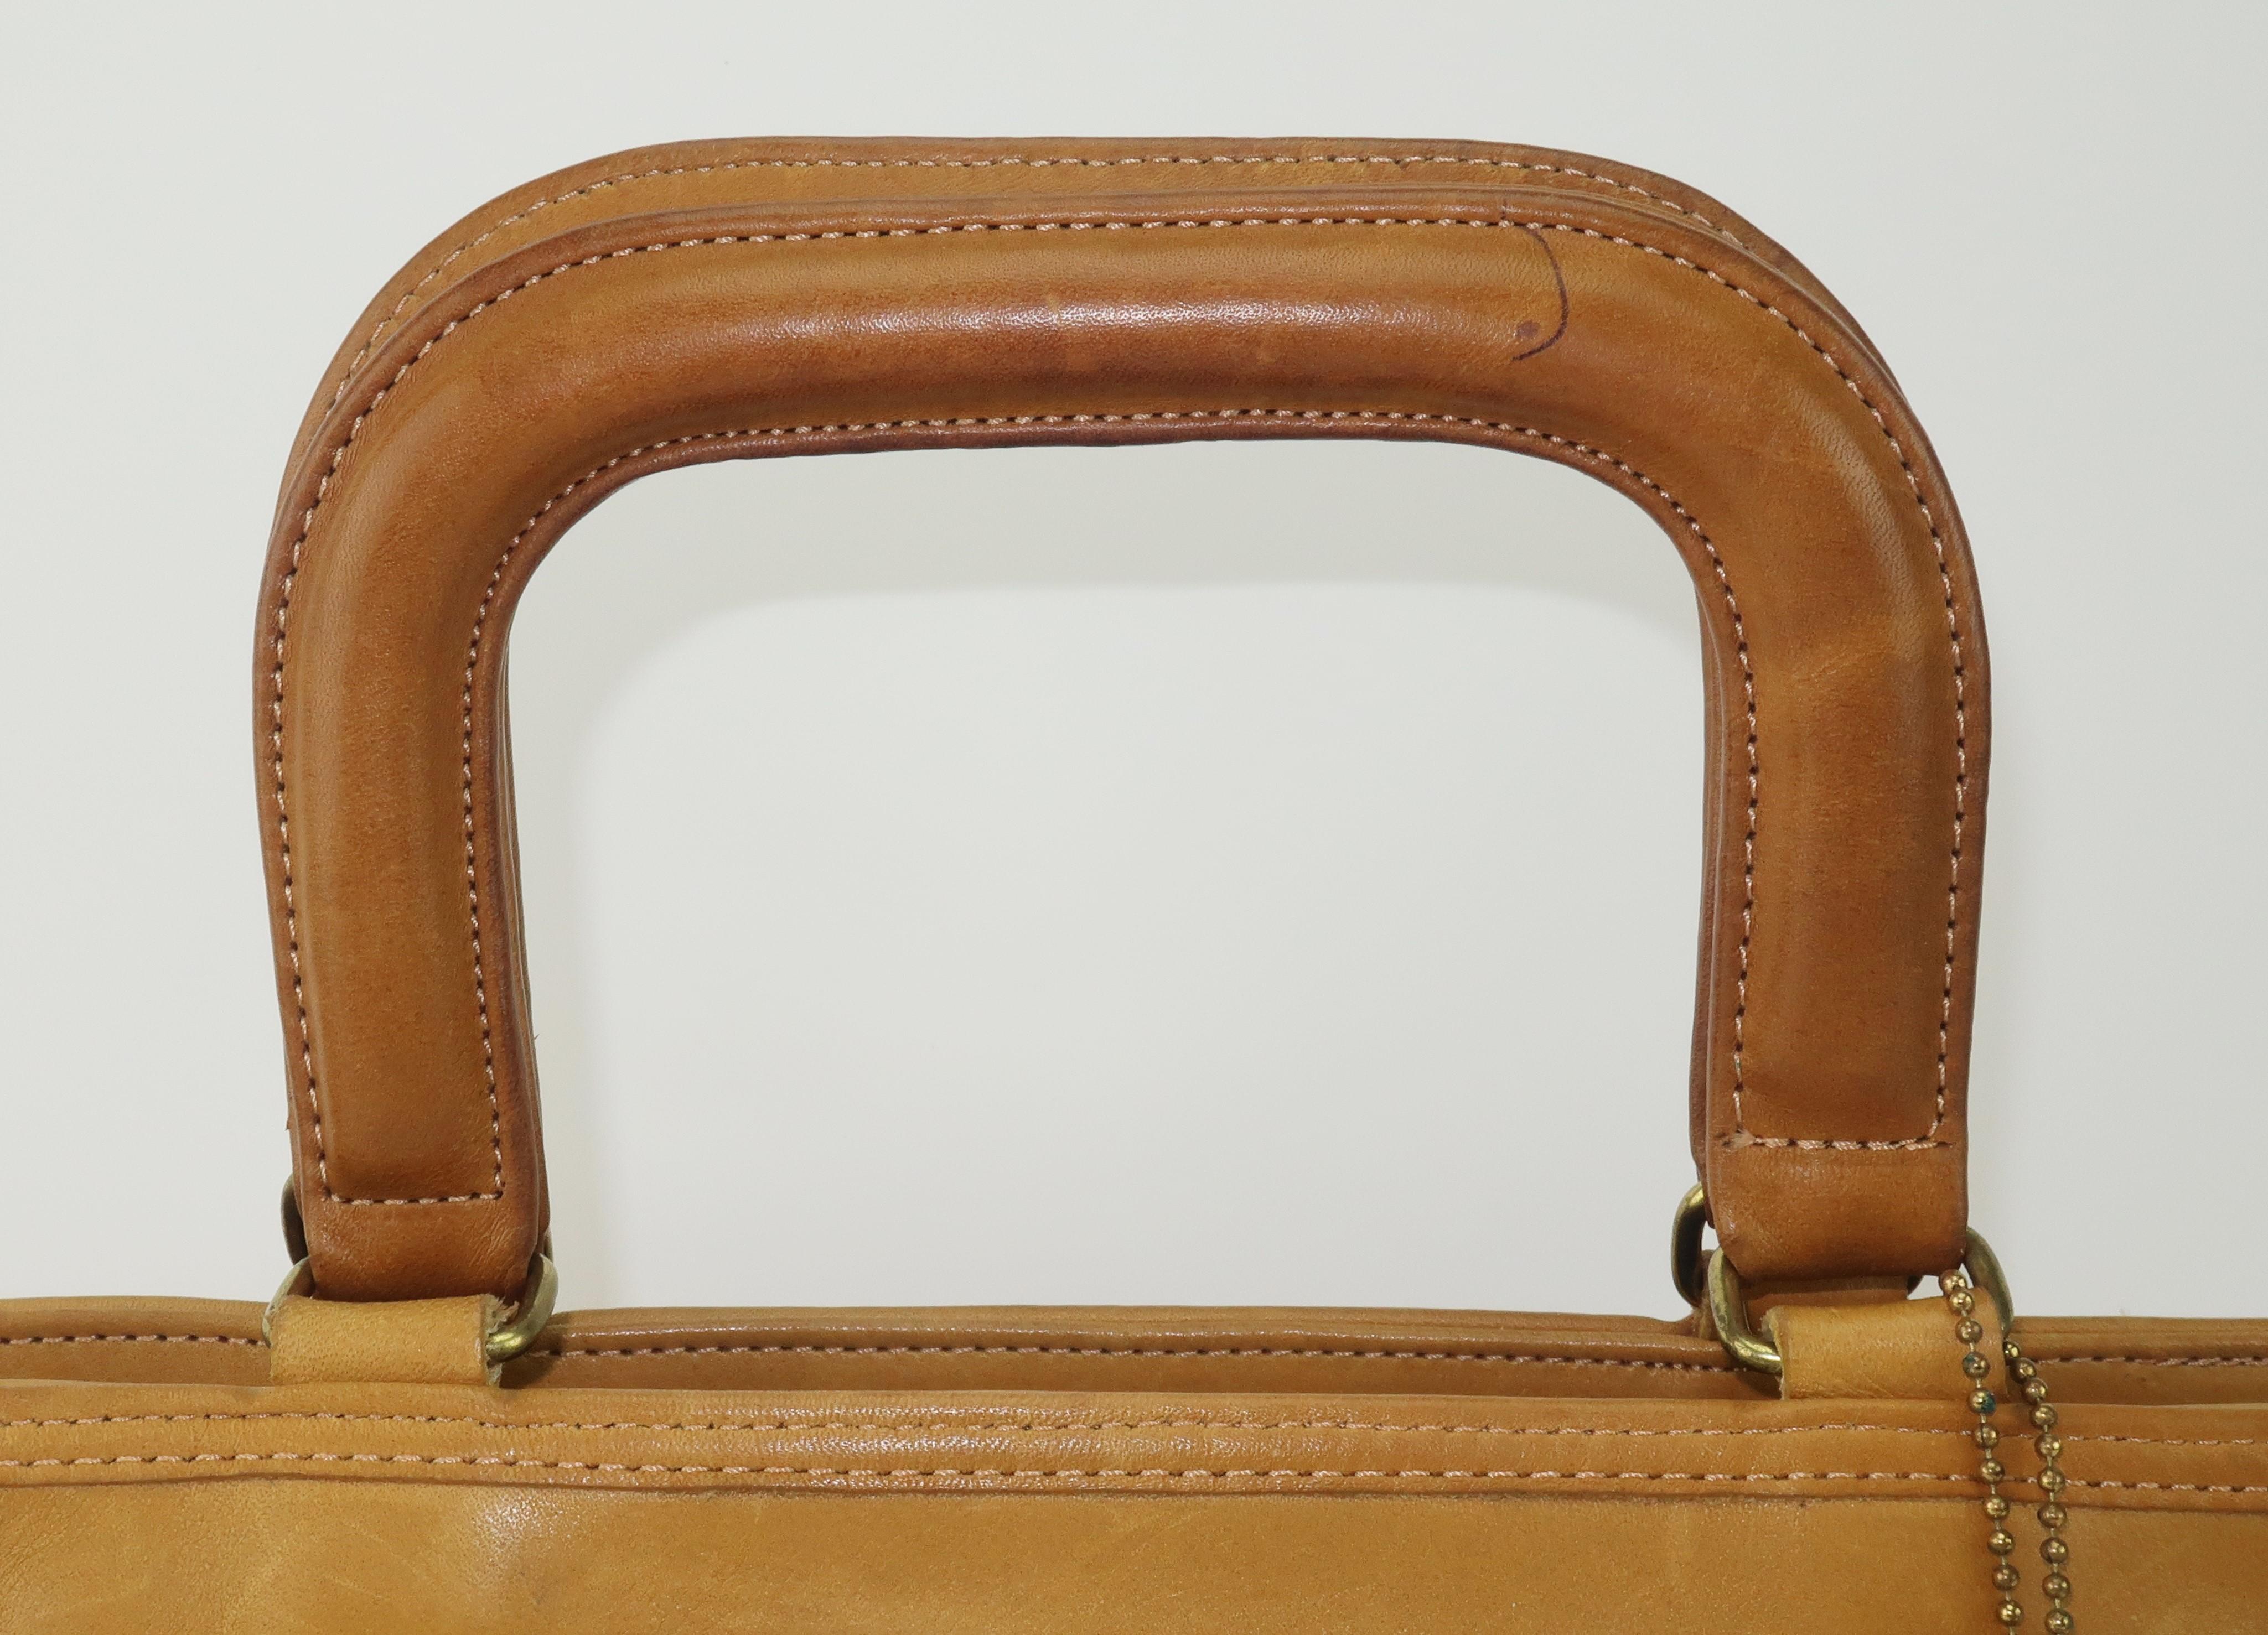 1970's tan leather Coach handbag originally designed by Bonnie Cashin and nicknamed the Watermelon tote.  The handbag has the practical silhouette of a top handle briefcase with a zipper closure which opens to reveal a roomy interior and a fun outer